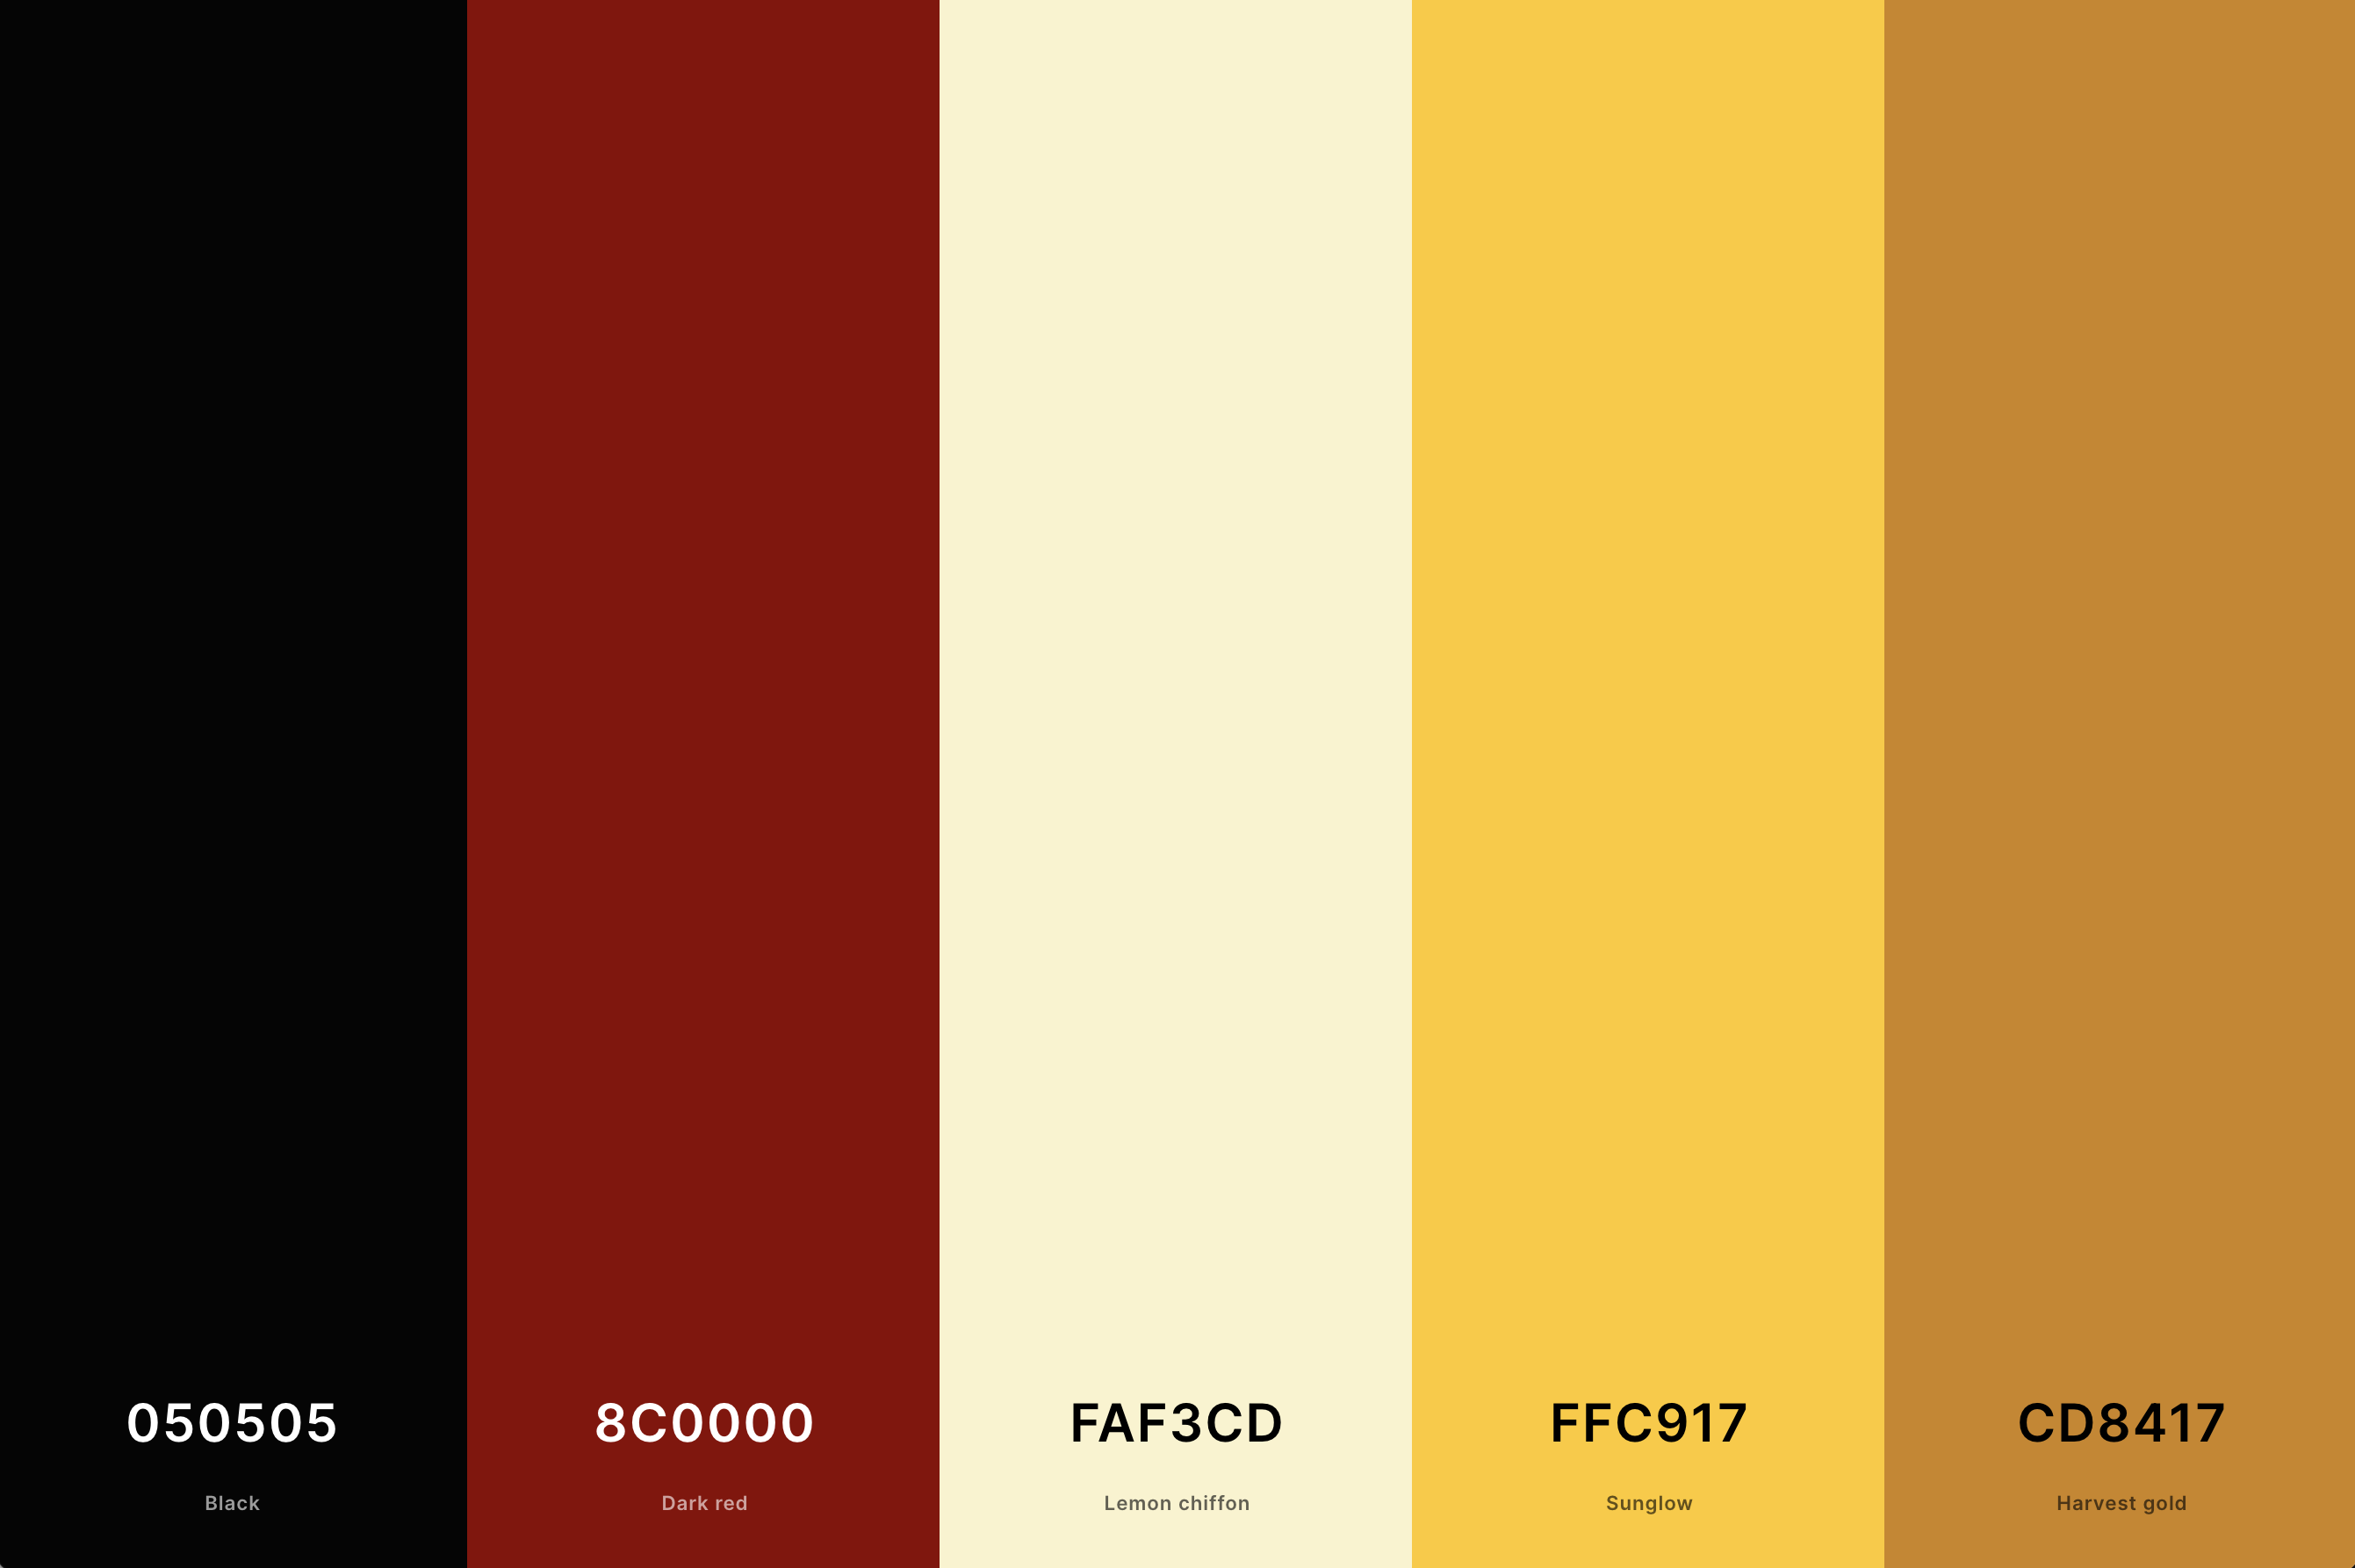 17. Red, Black And Gold Color Palette Color Palette with Black (Hex #050505) + Dark Red (Hex #8C0000) + Lemon Chiffon (Hex #FAF3CD) + Sunglow (Hex #FFC917) + Harvest Gold (Hex #CD8417) Color Palette with Hex Codes